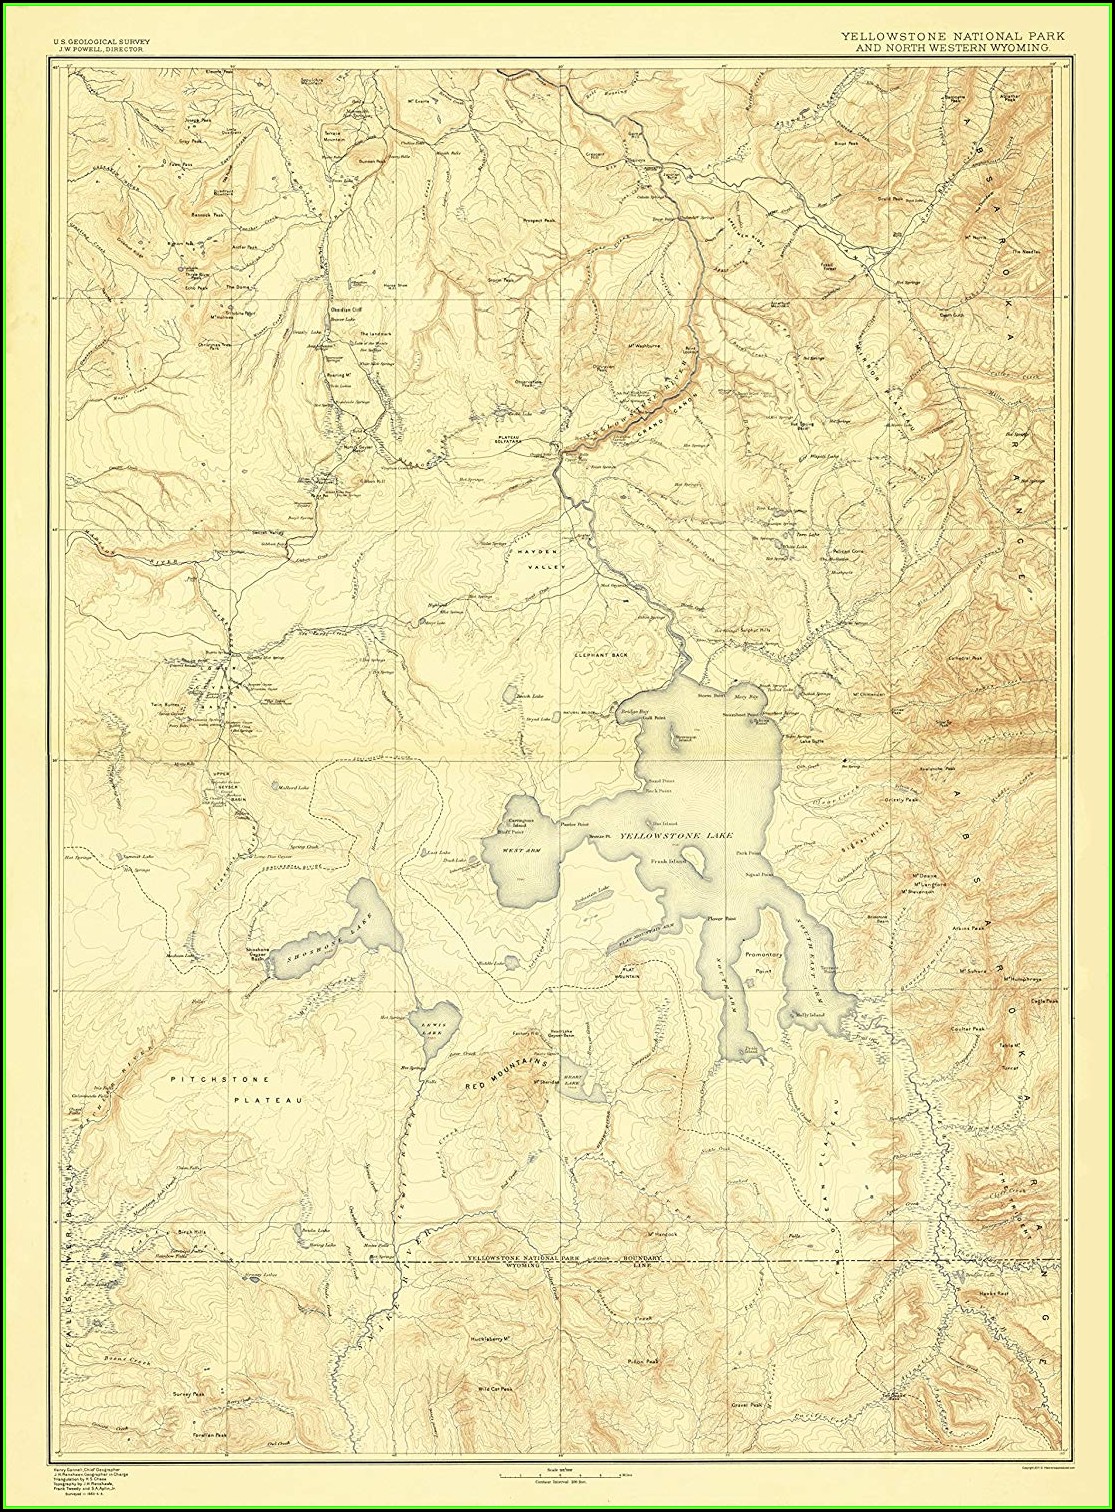 Maps Of Yellowstone National Park